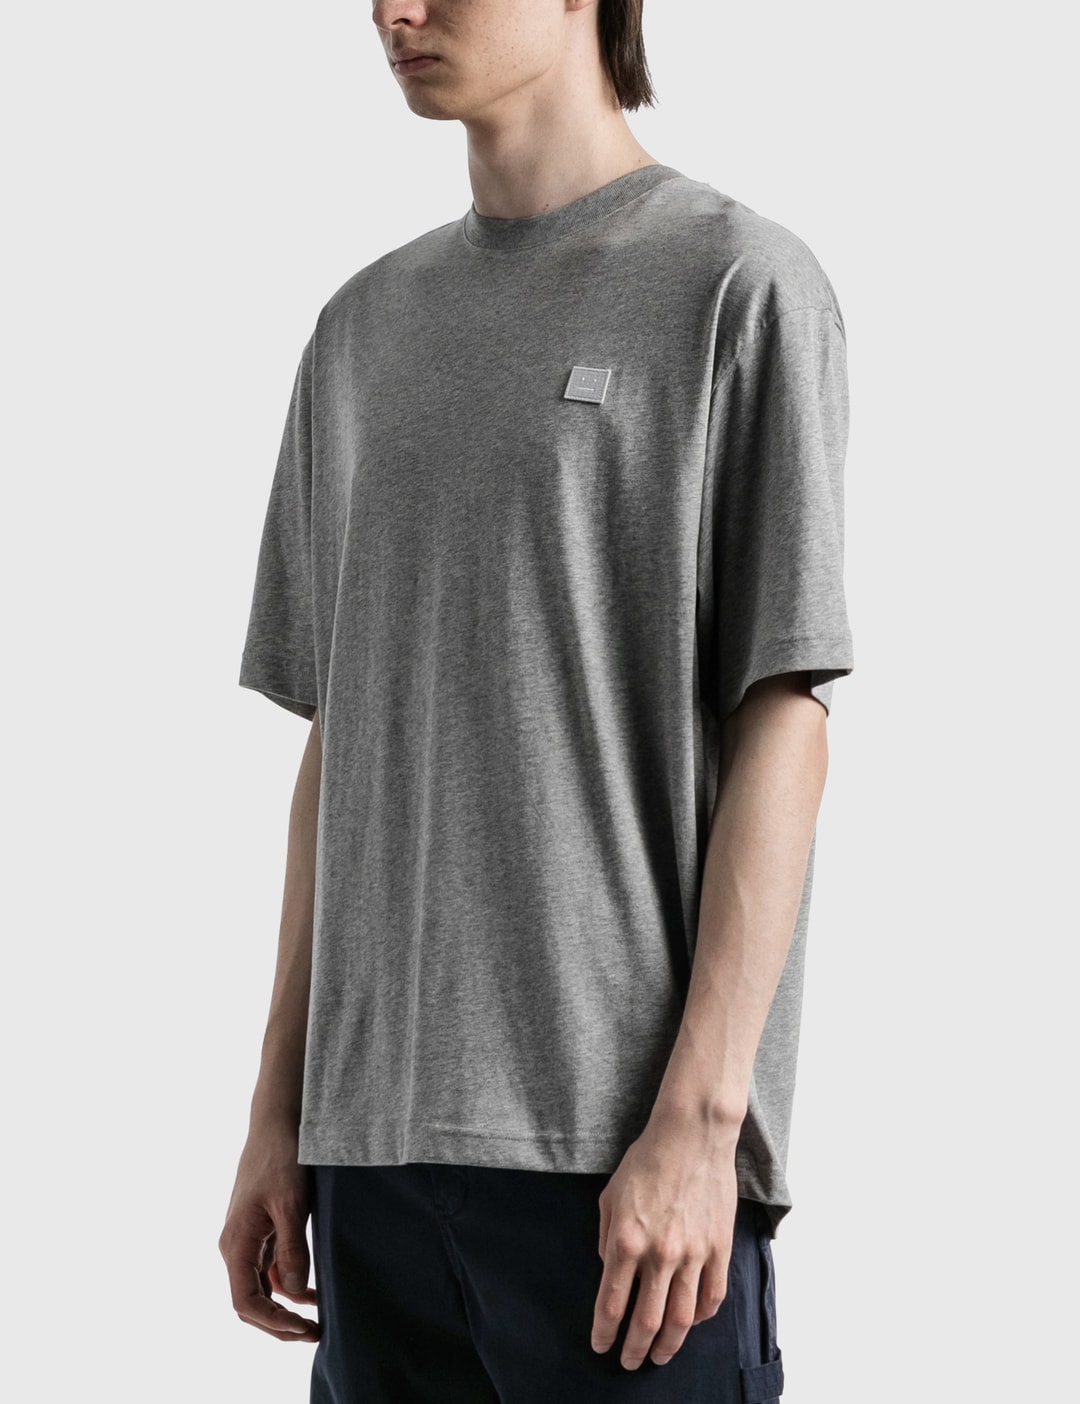 Acne Studios - Exford Face T-shirt | HBX - Globally Curated Fashion and ...